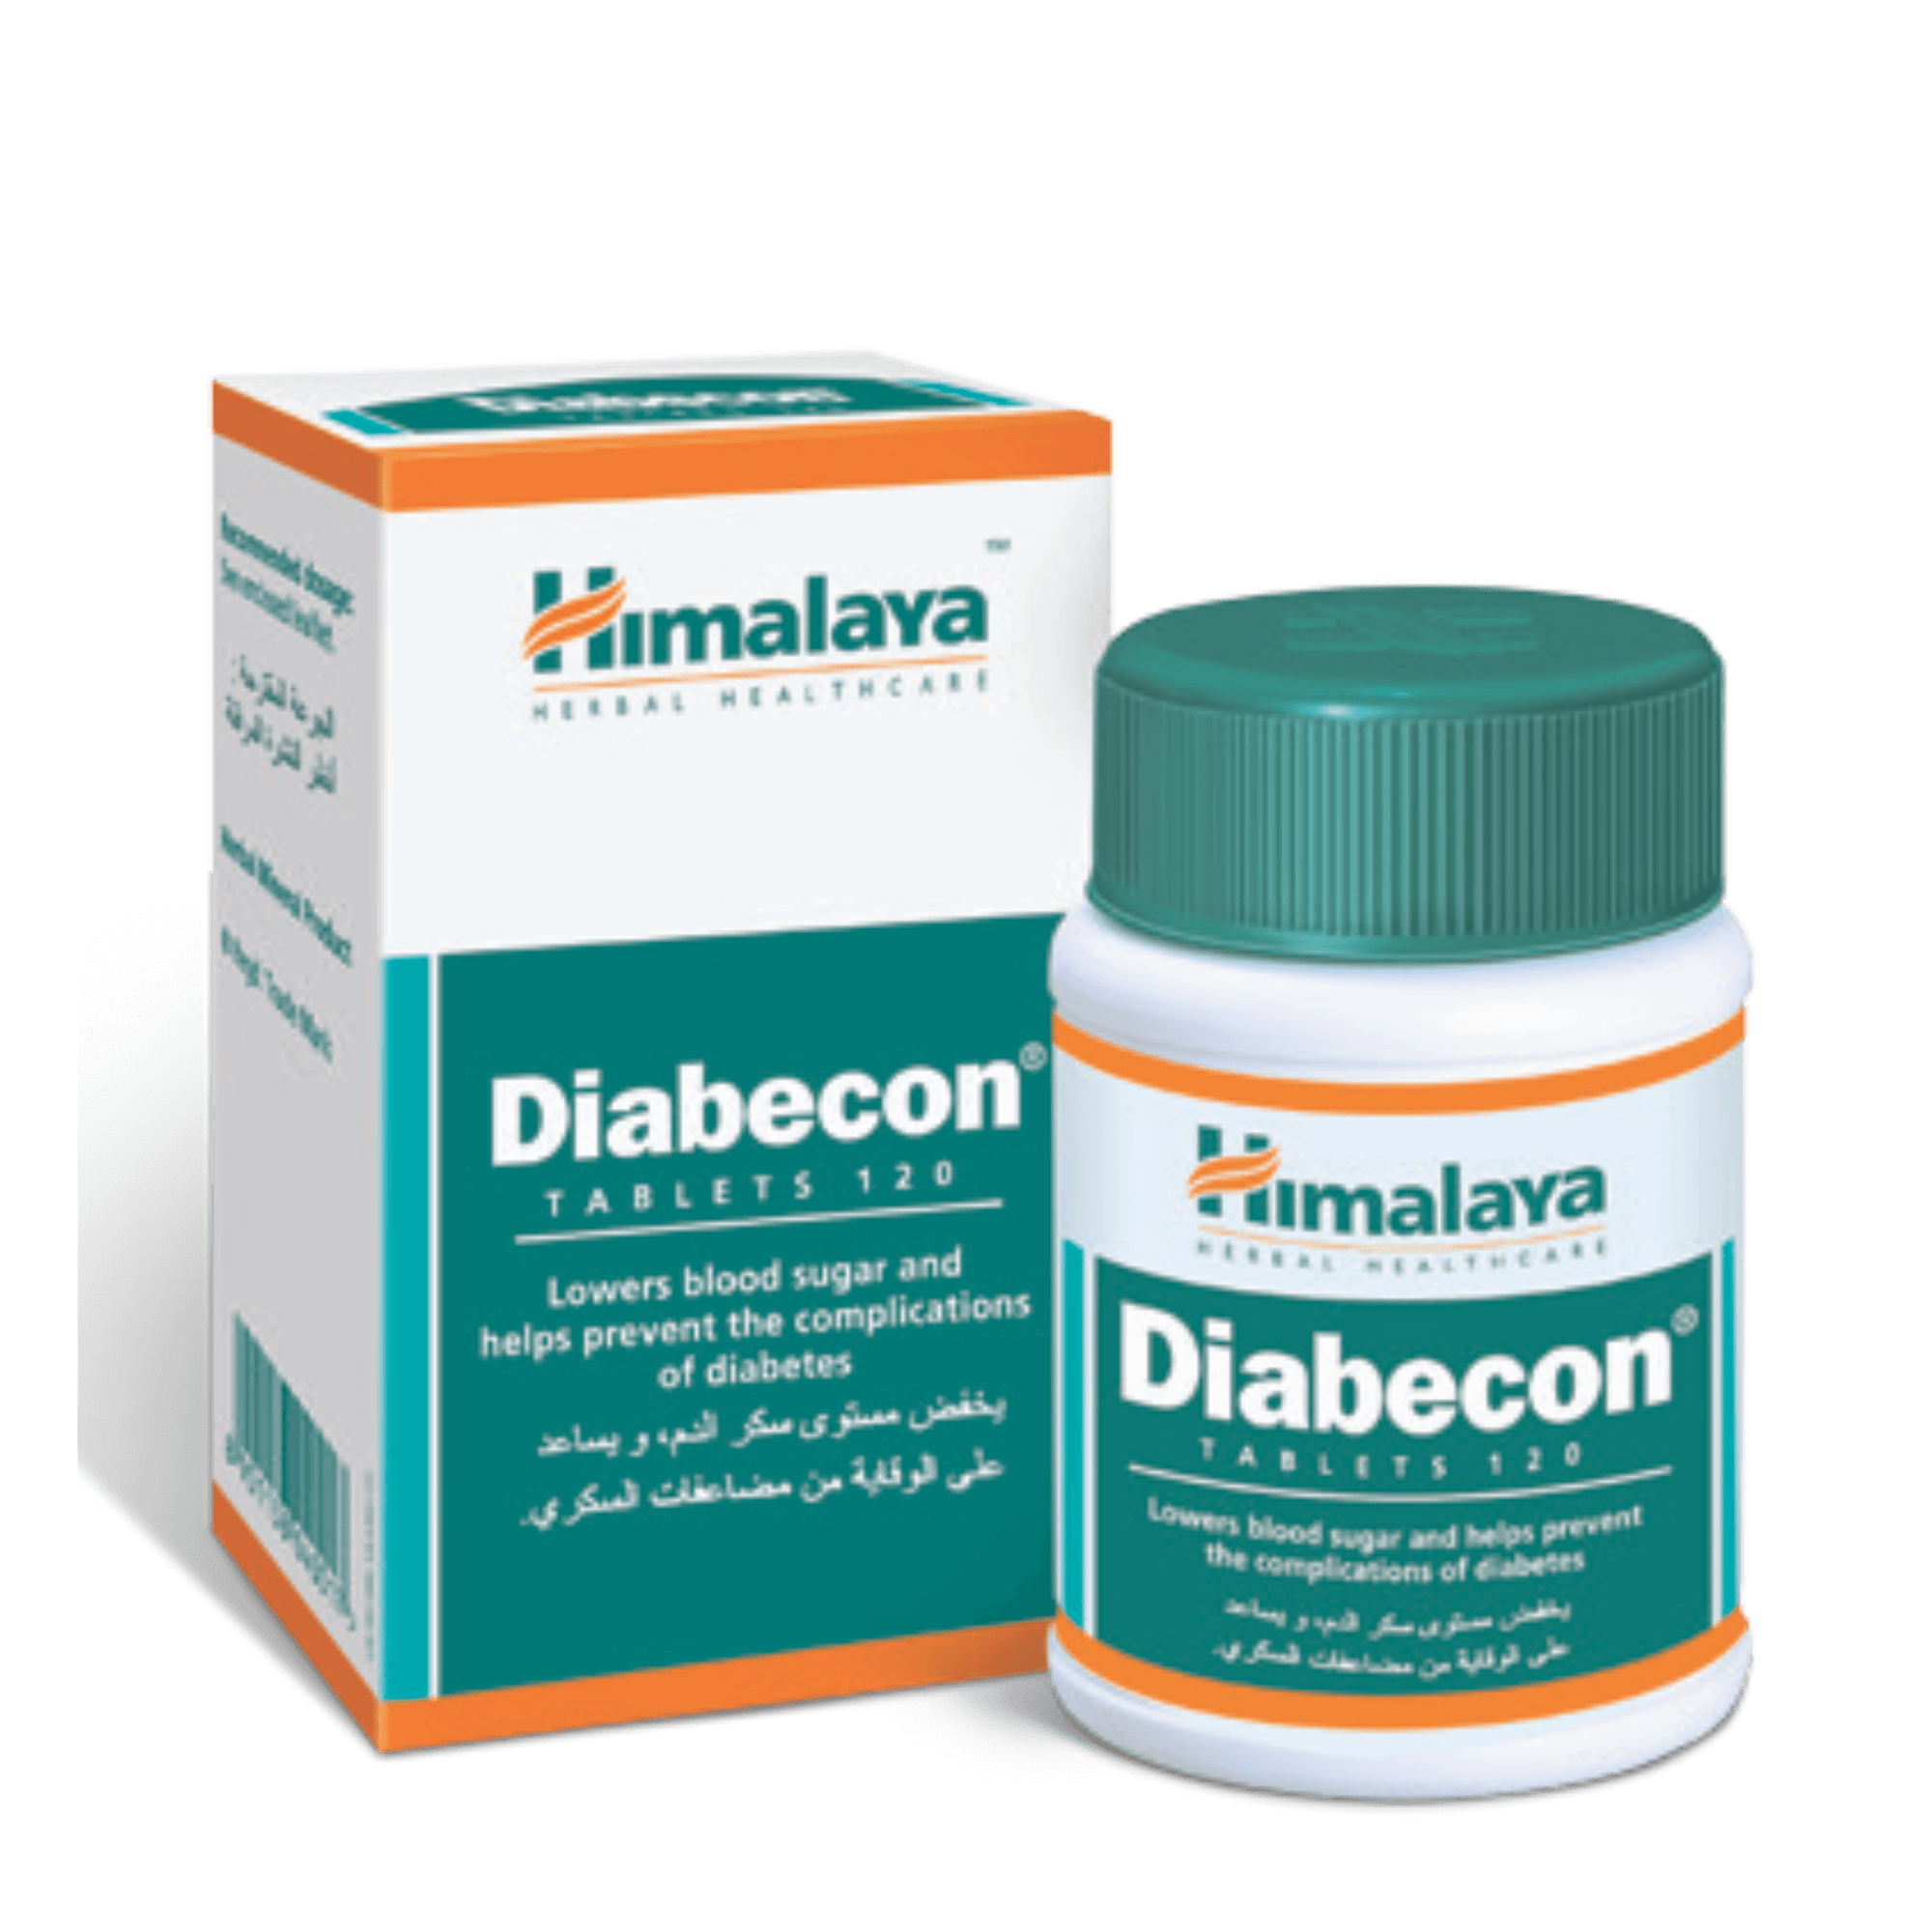 Himalaya Diabecon - Tablets to reduce excessive blood sugar levels